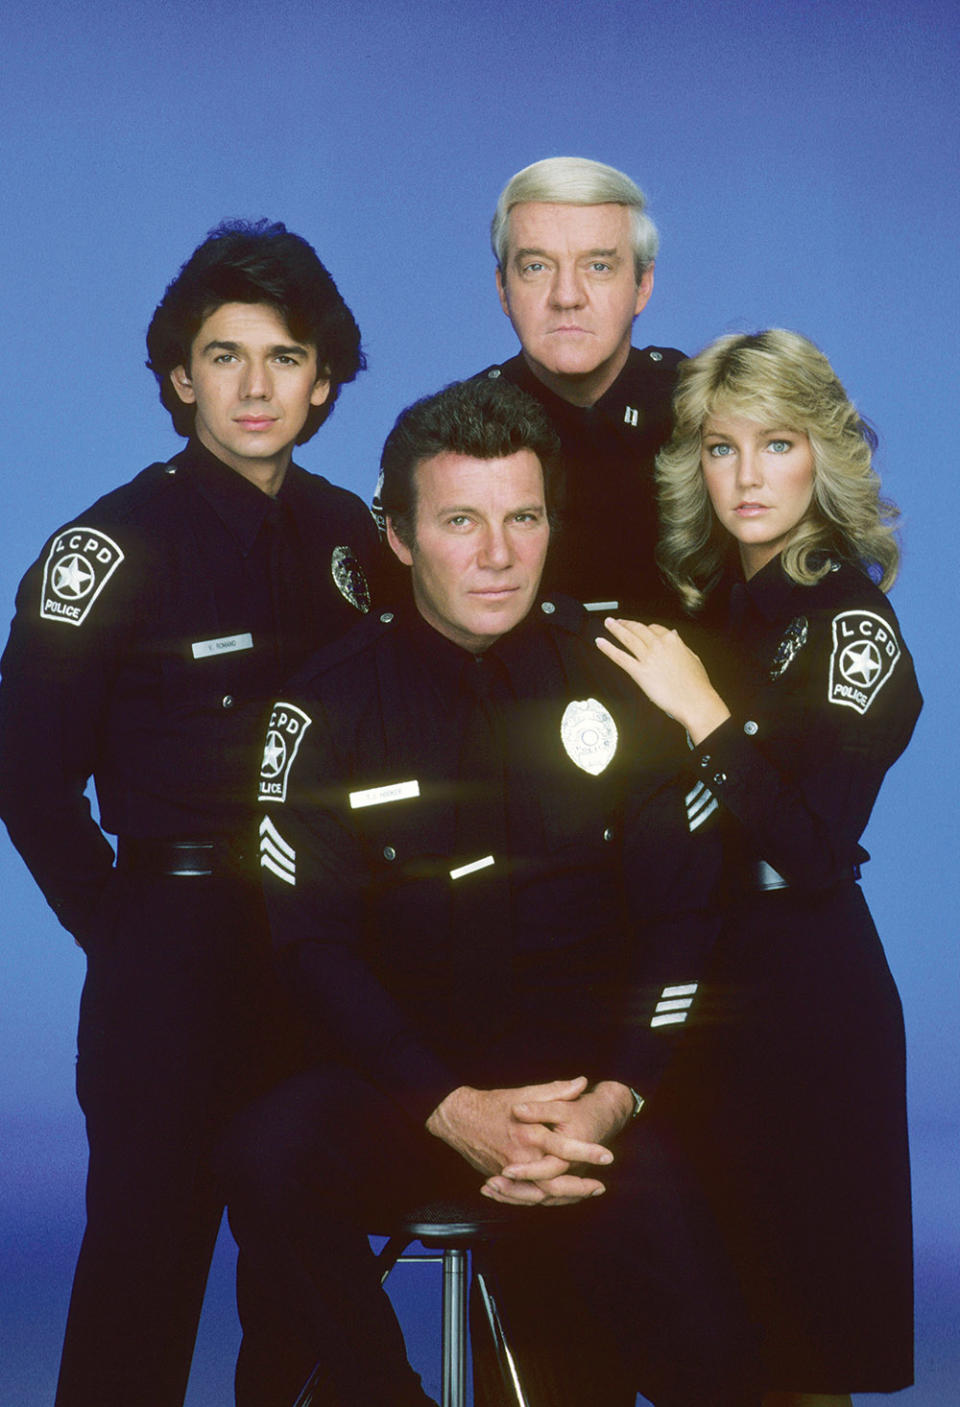 William Shatner front center starred opposite Adrian Zmed left, Richard Herd and Heather Locklear on T.J. Hooker, which debuted in 1982